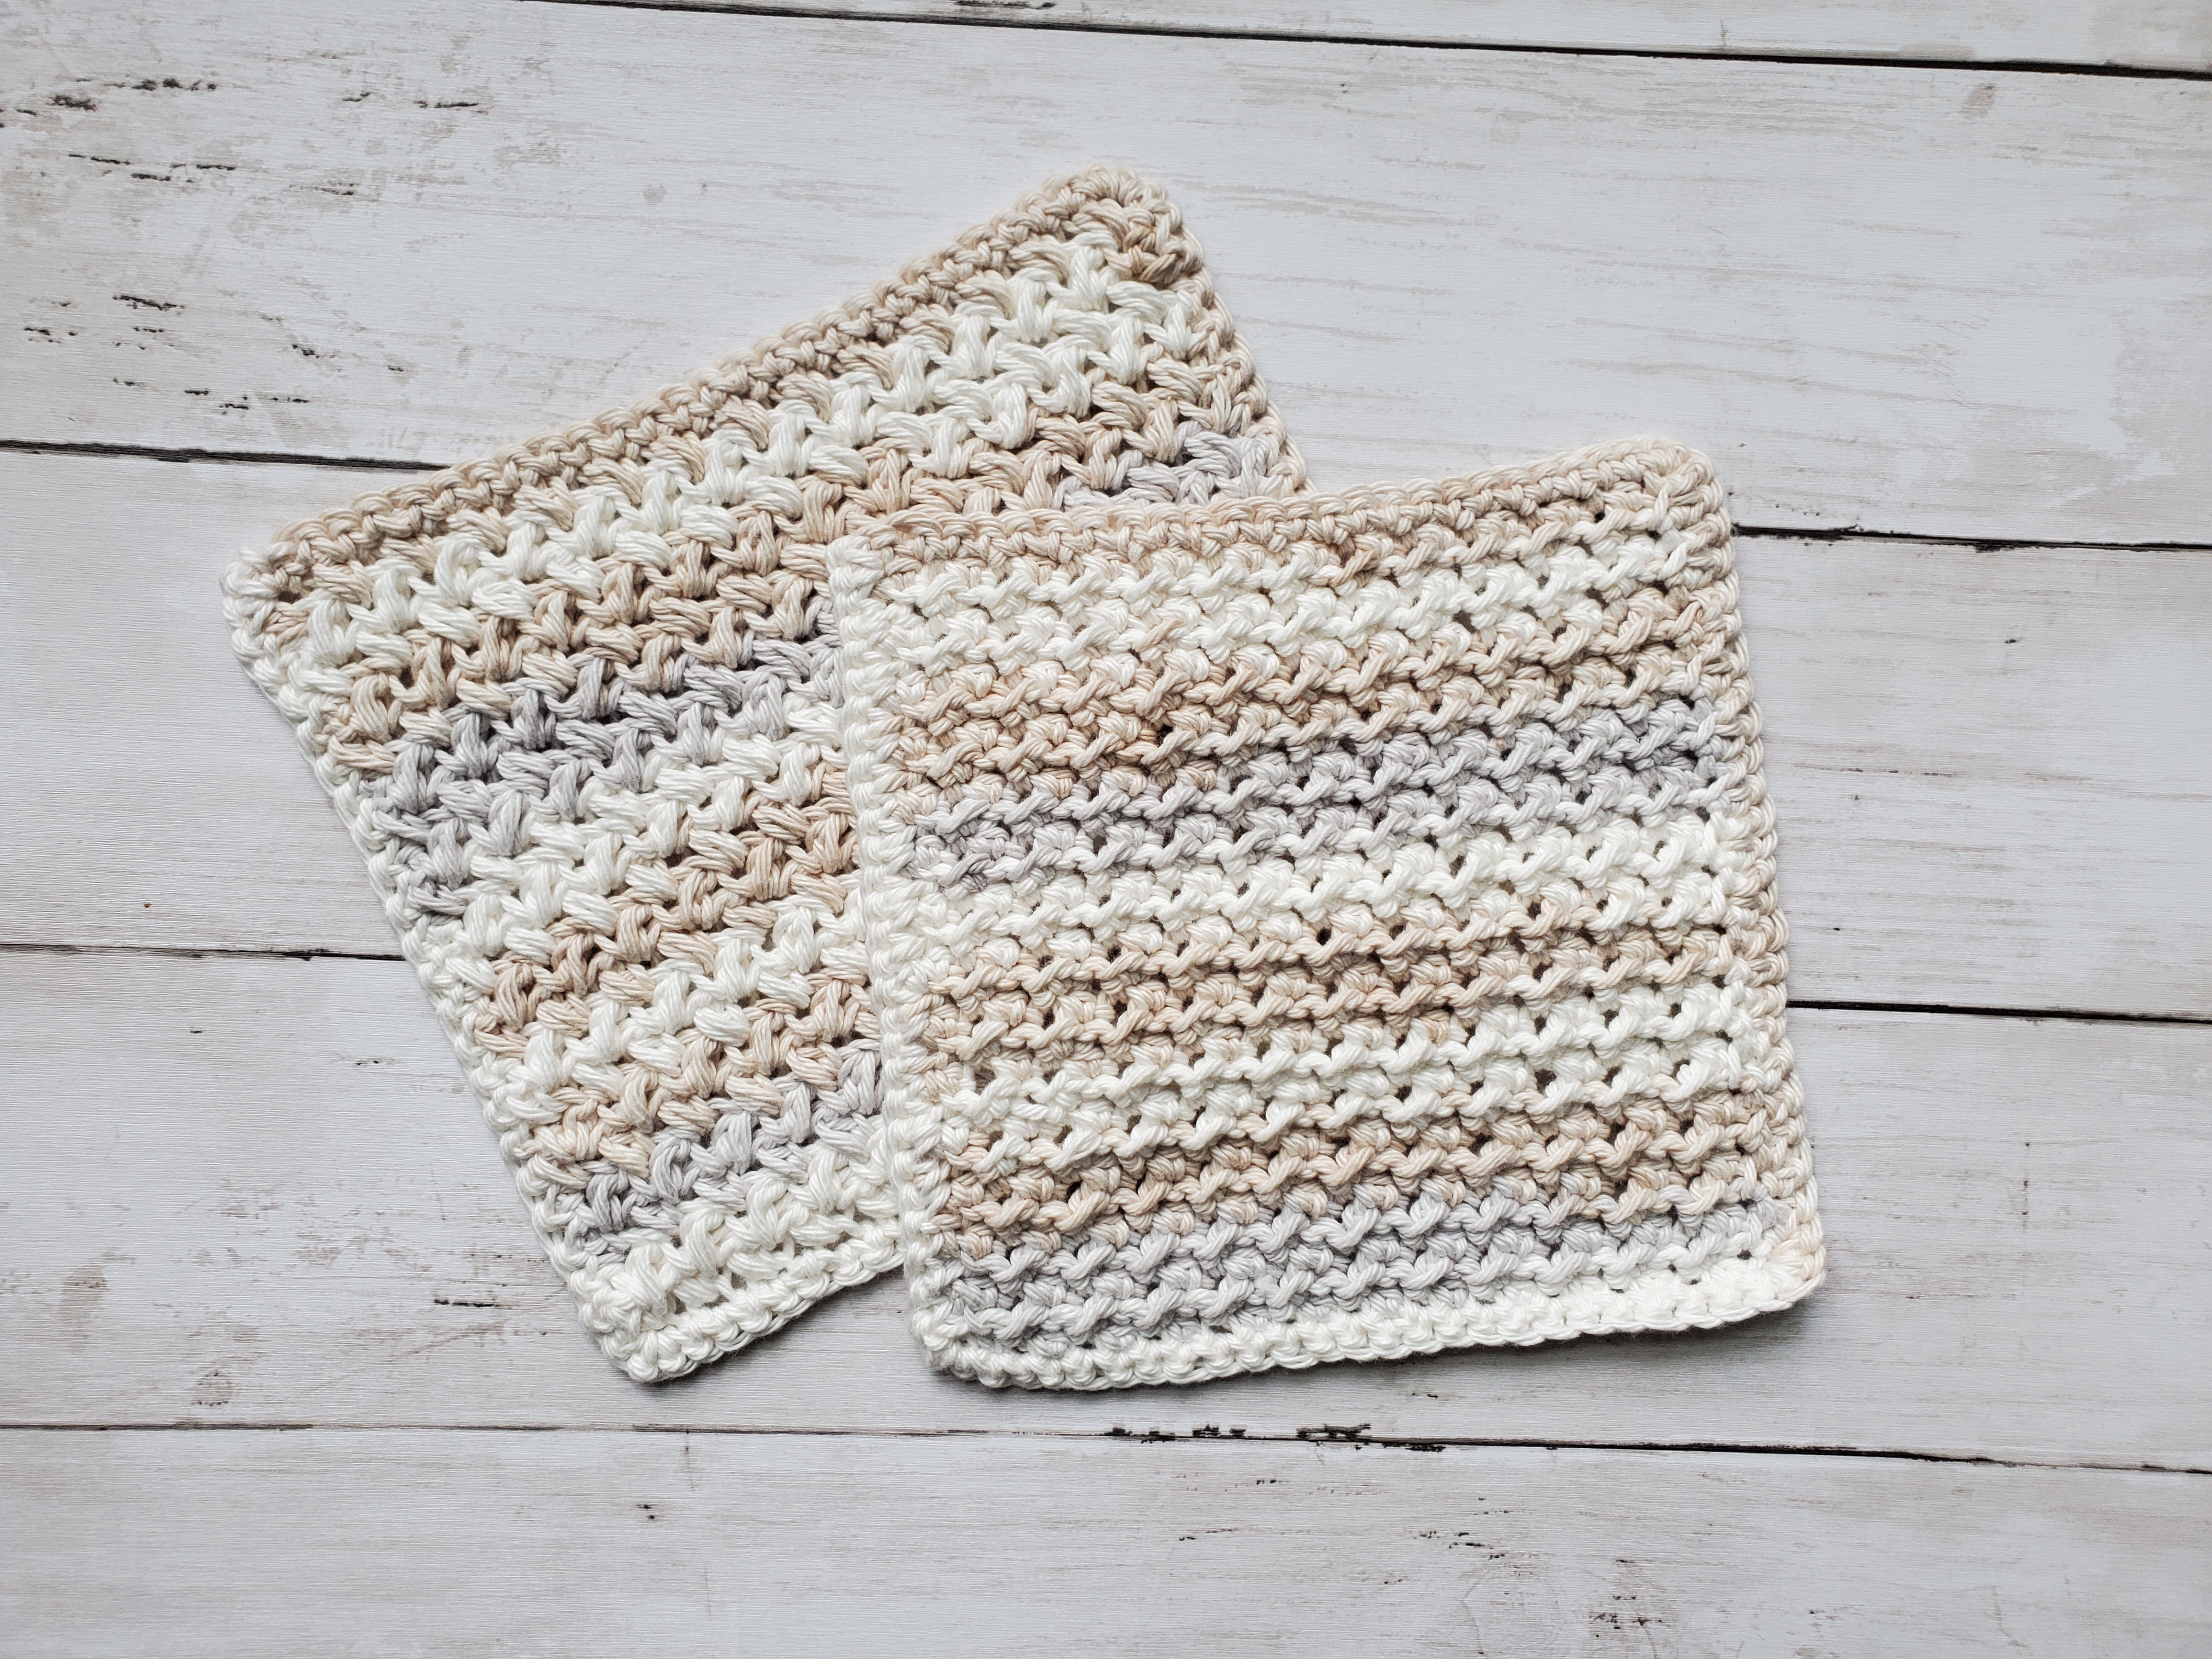 2 Crochet Dishcloth Patterns + What's the Best Dishcloth Yarn to Use?